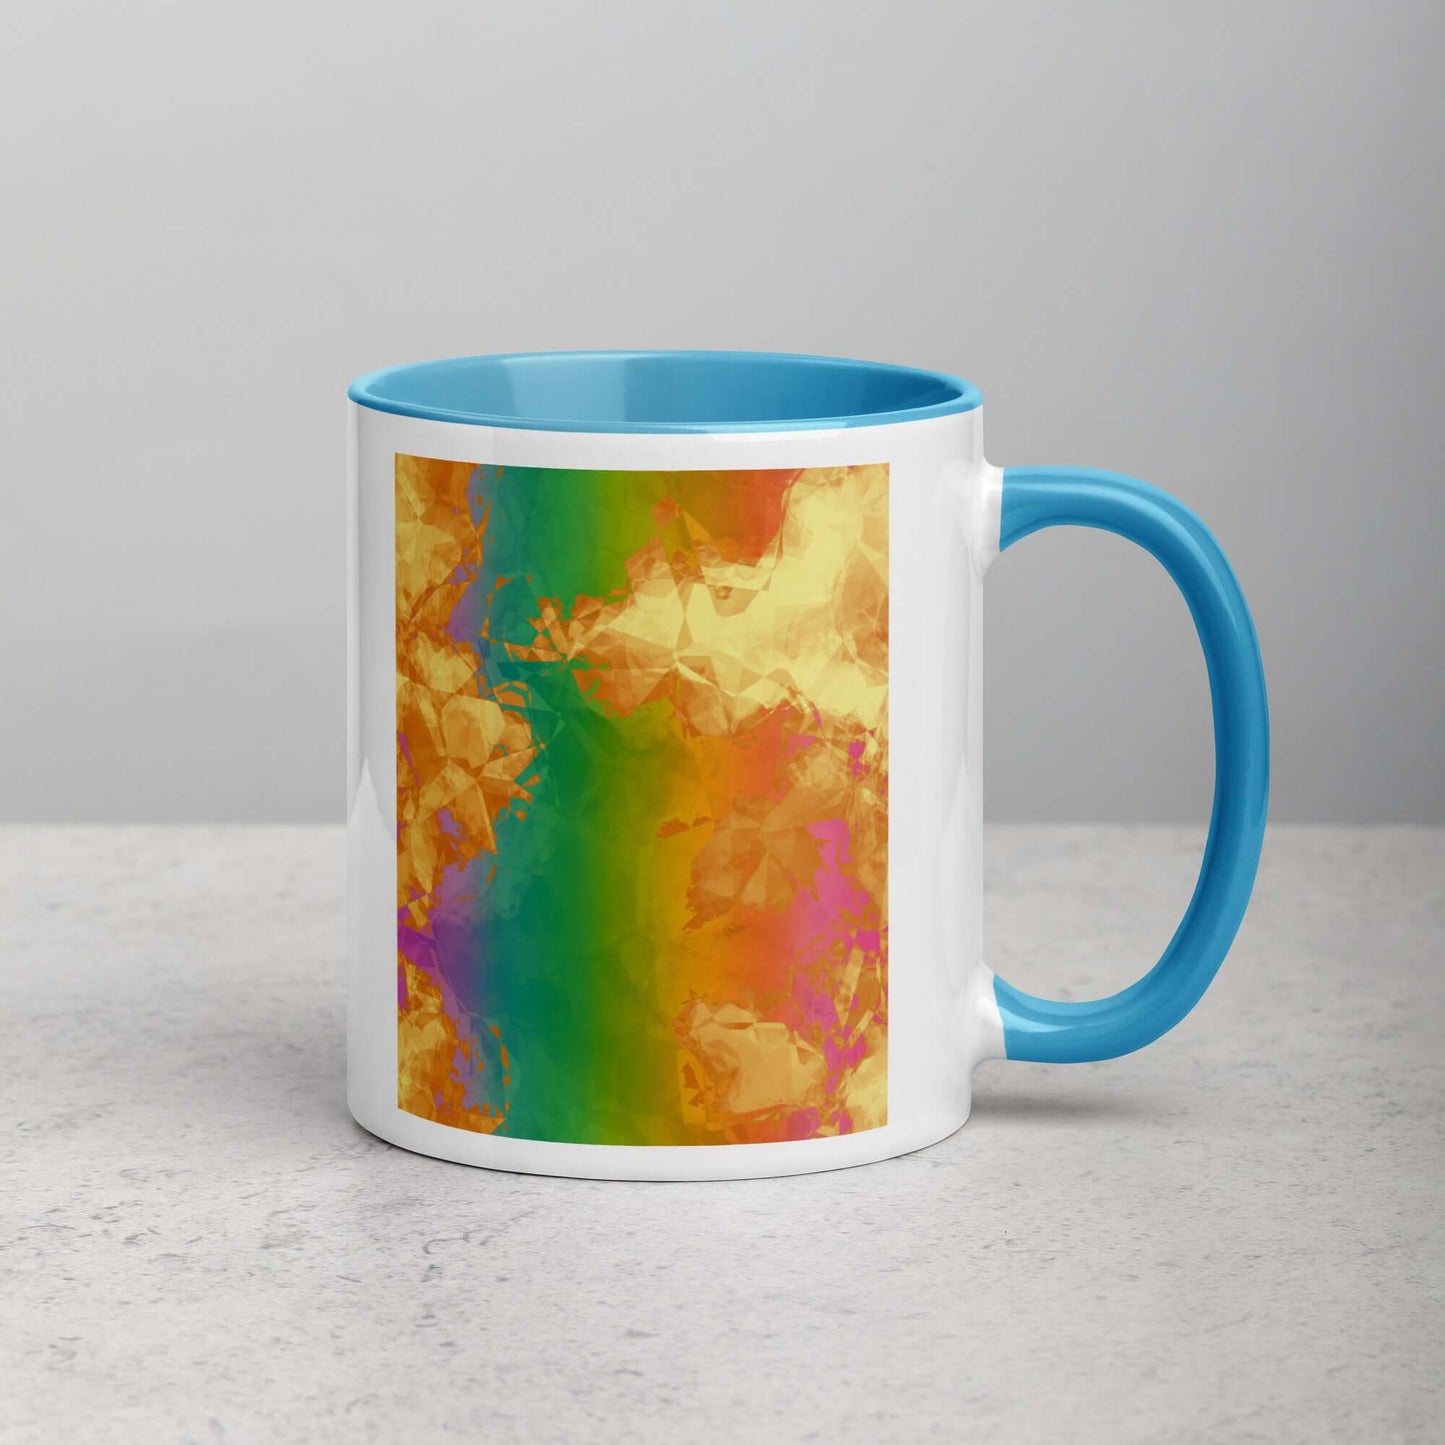 Fiery Rainbow “Rainbow Geode” Abstract Art Mug with Light Blue Color Inside Right Handed Front View